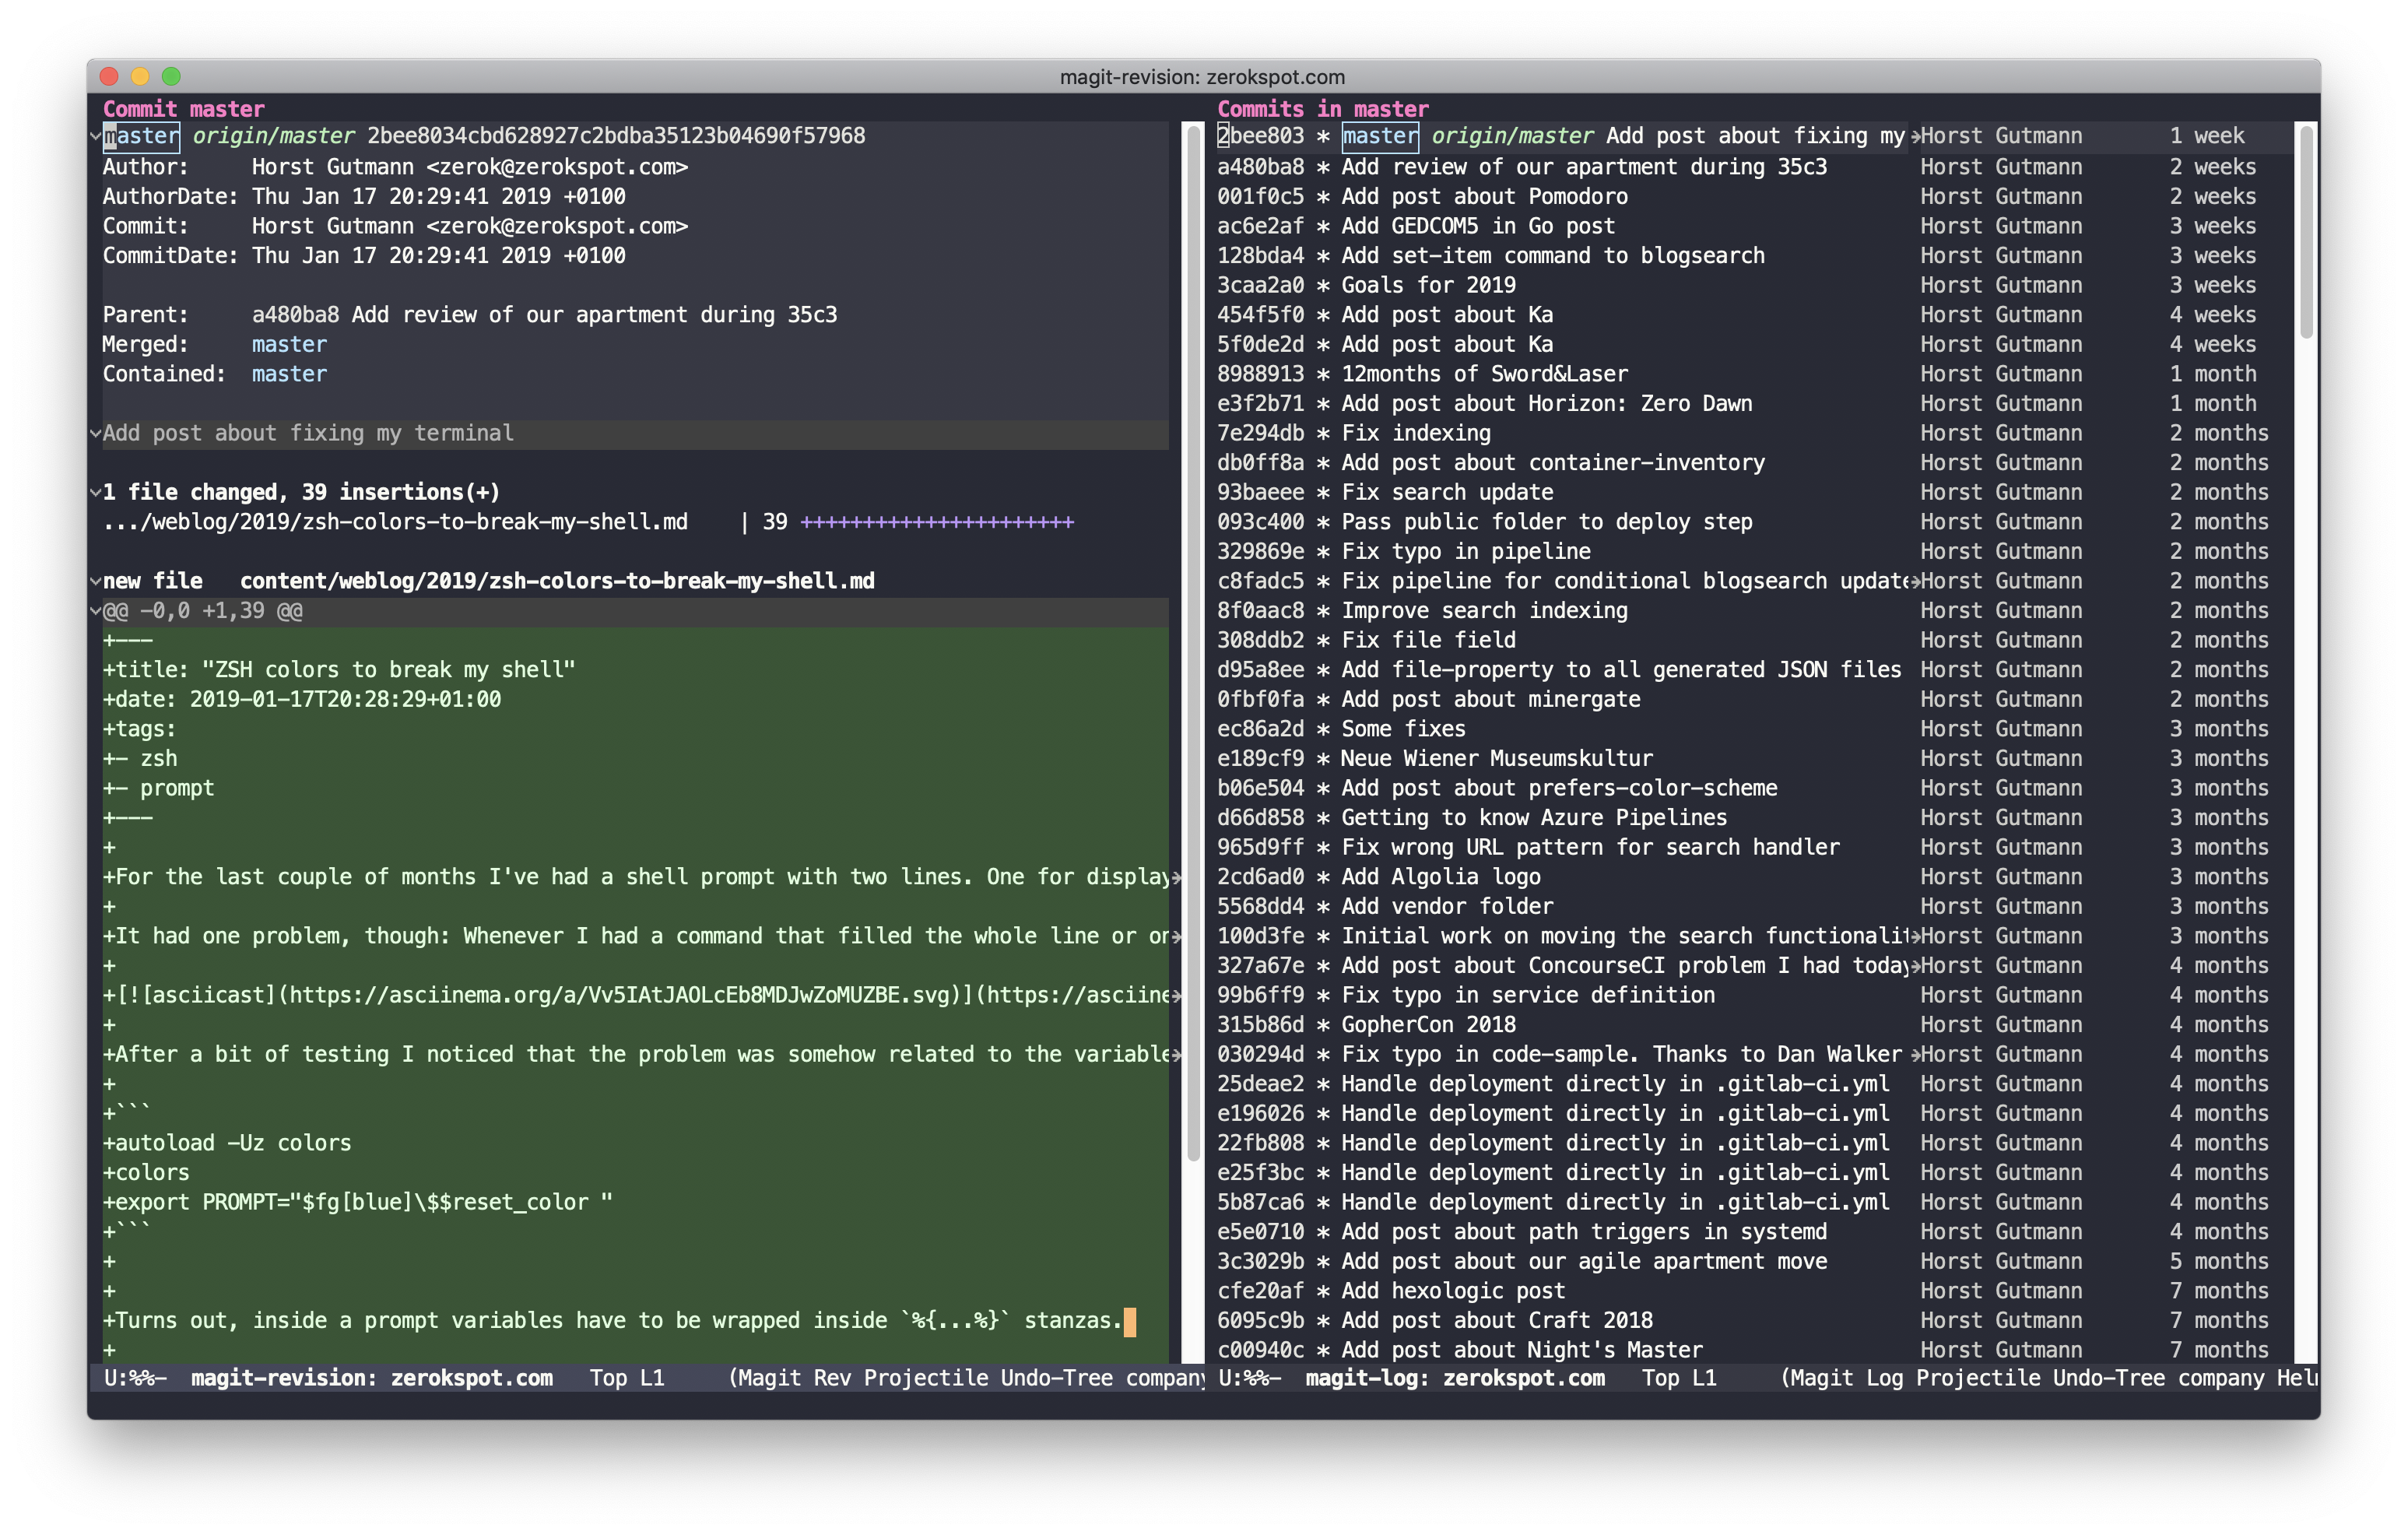 Emacs with Magit